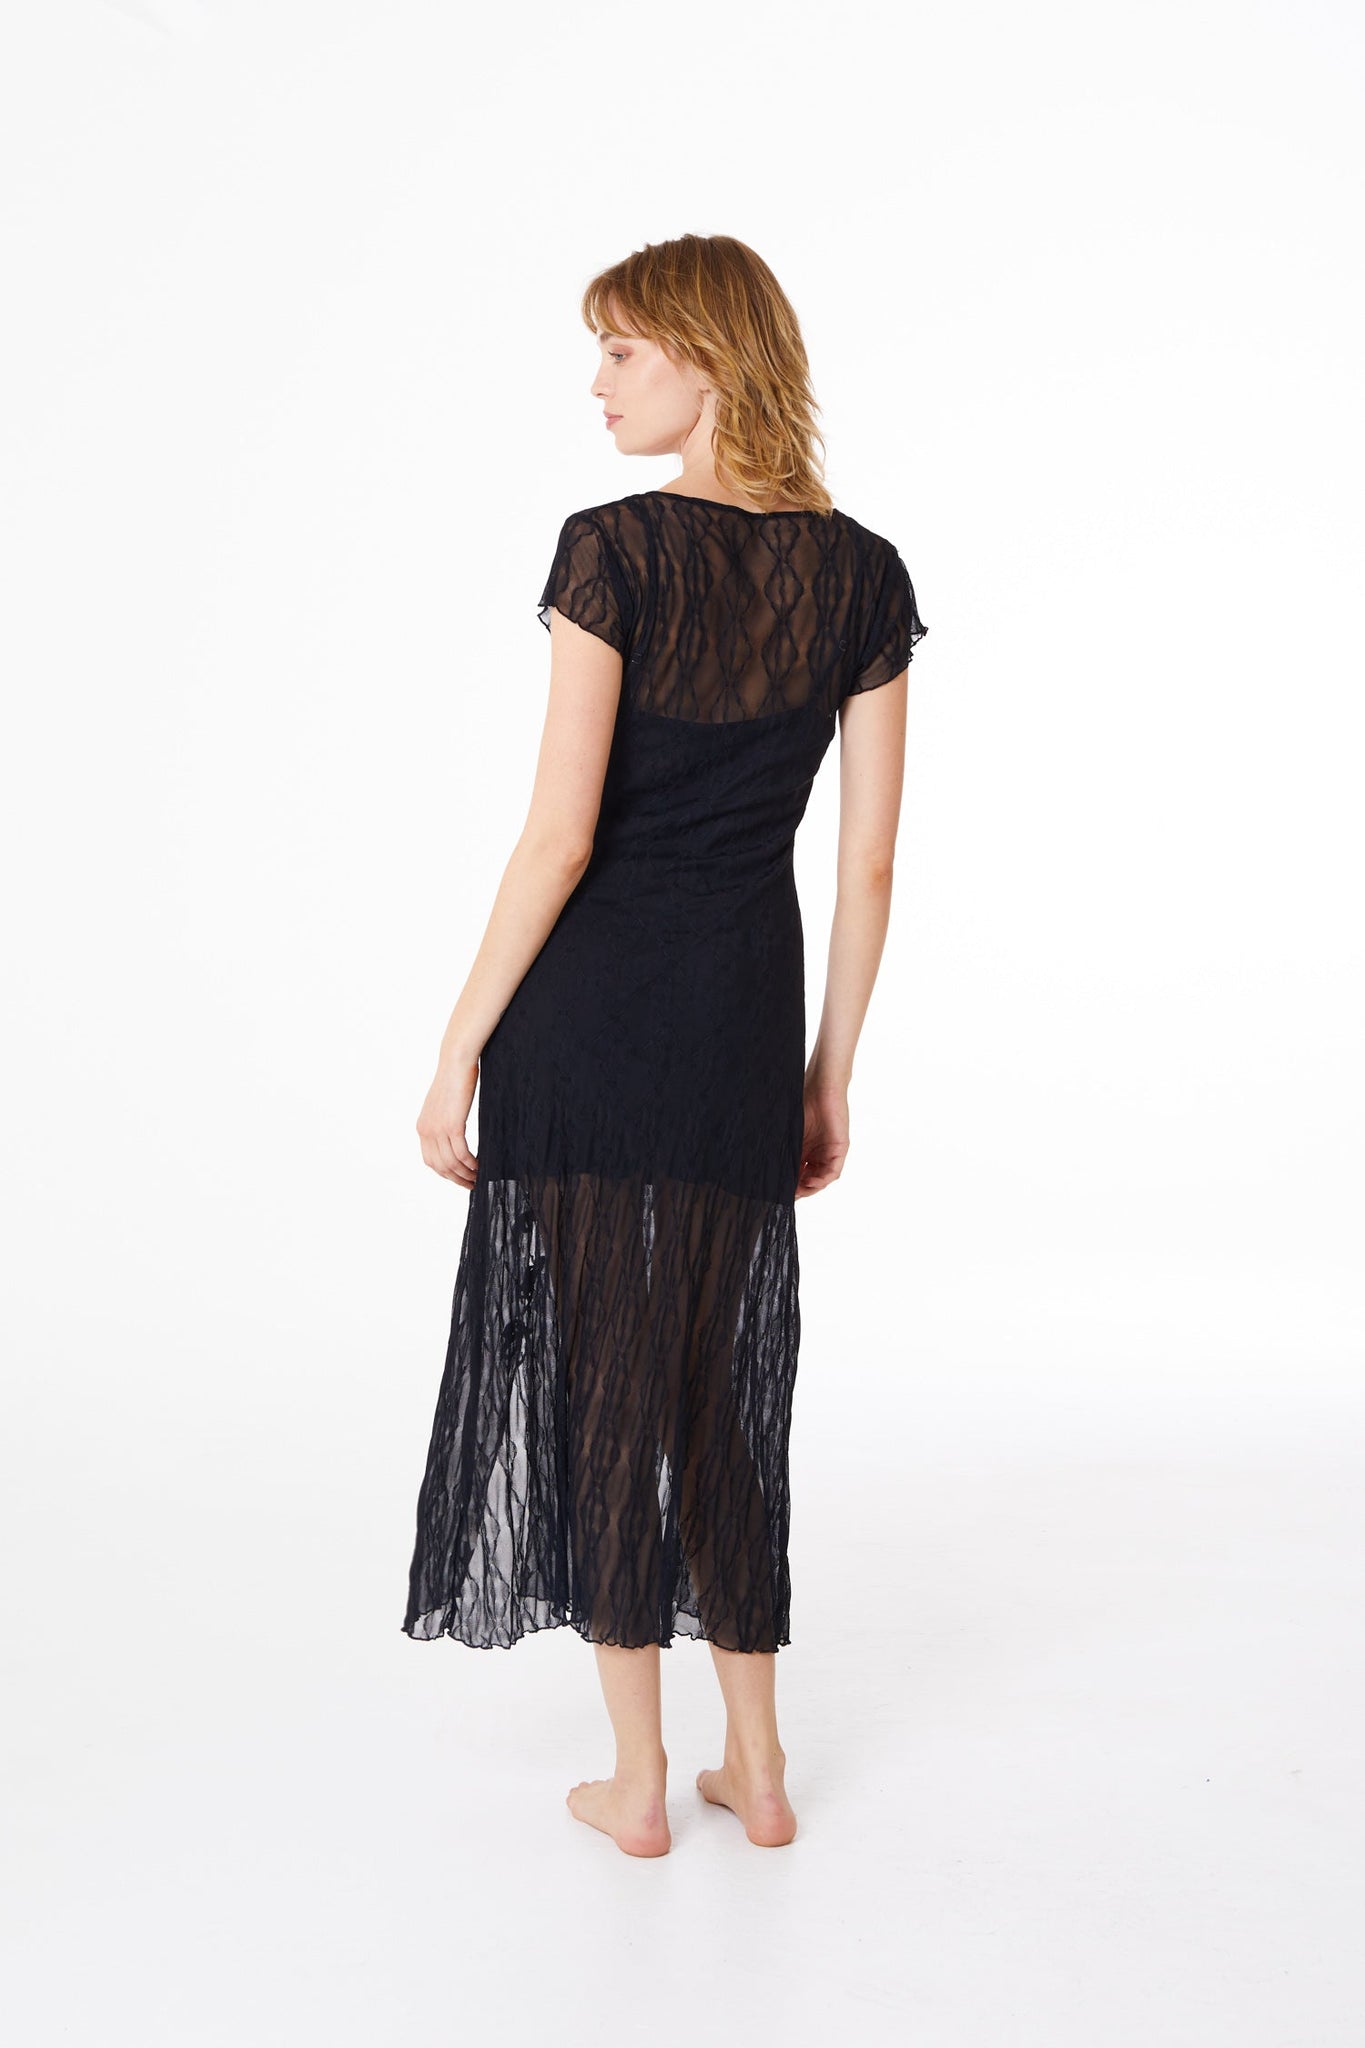 Find Me Now | Mariposa Lace Midi Dress with Lining